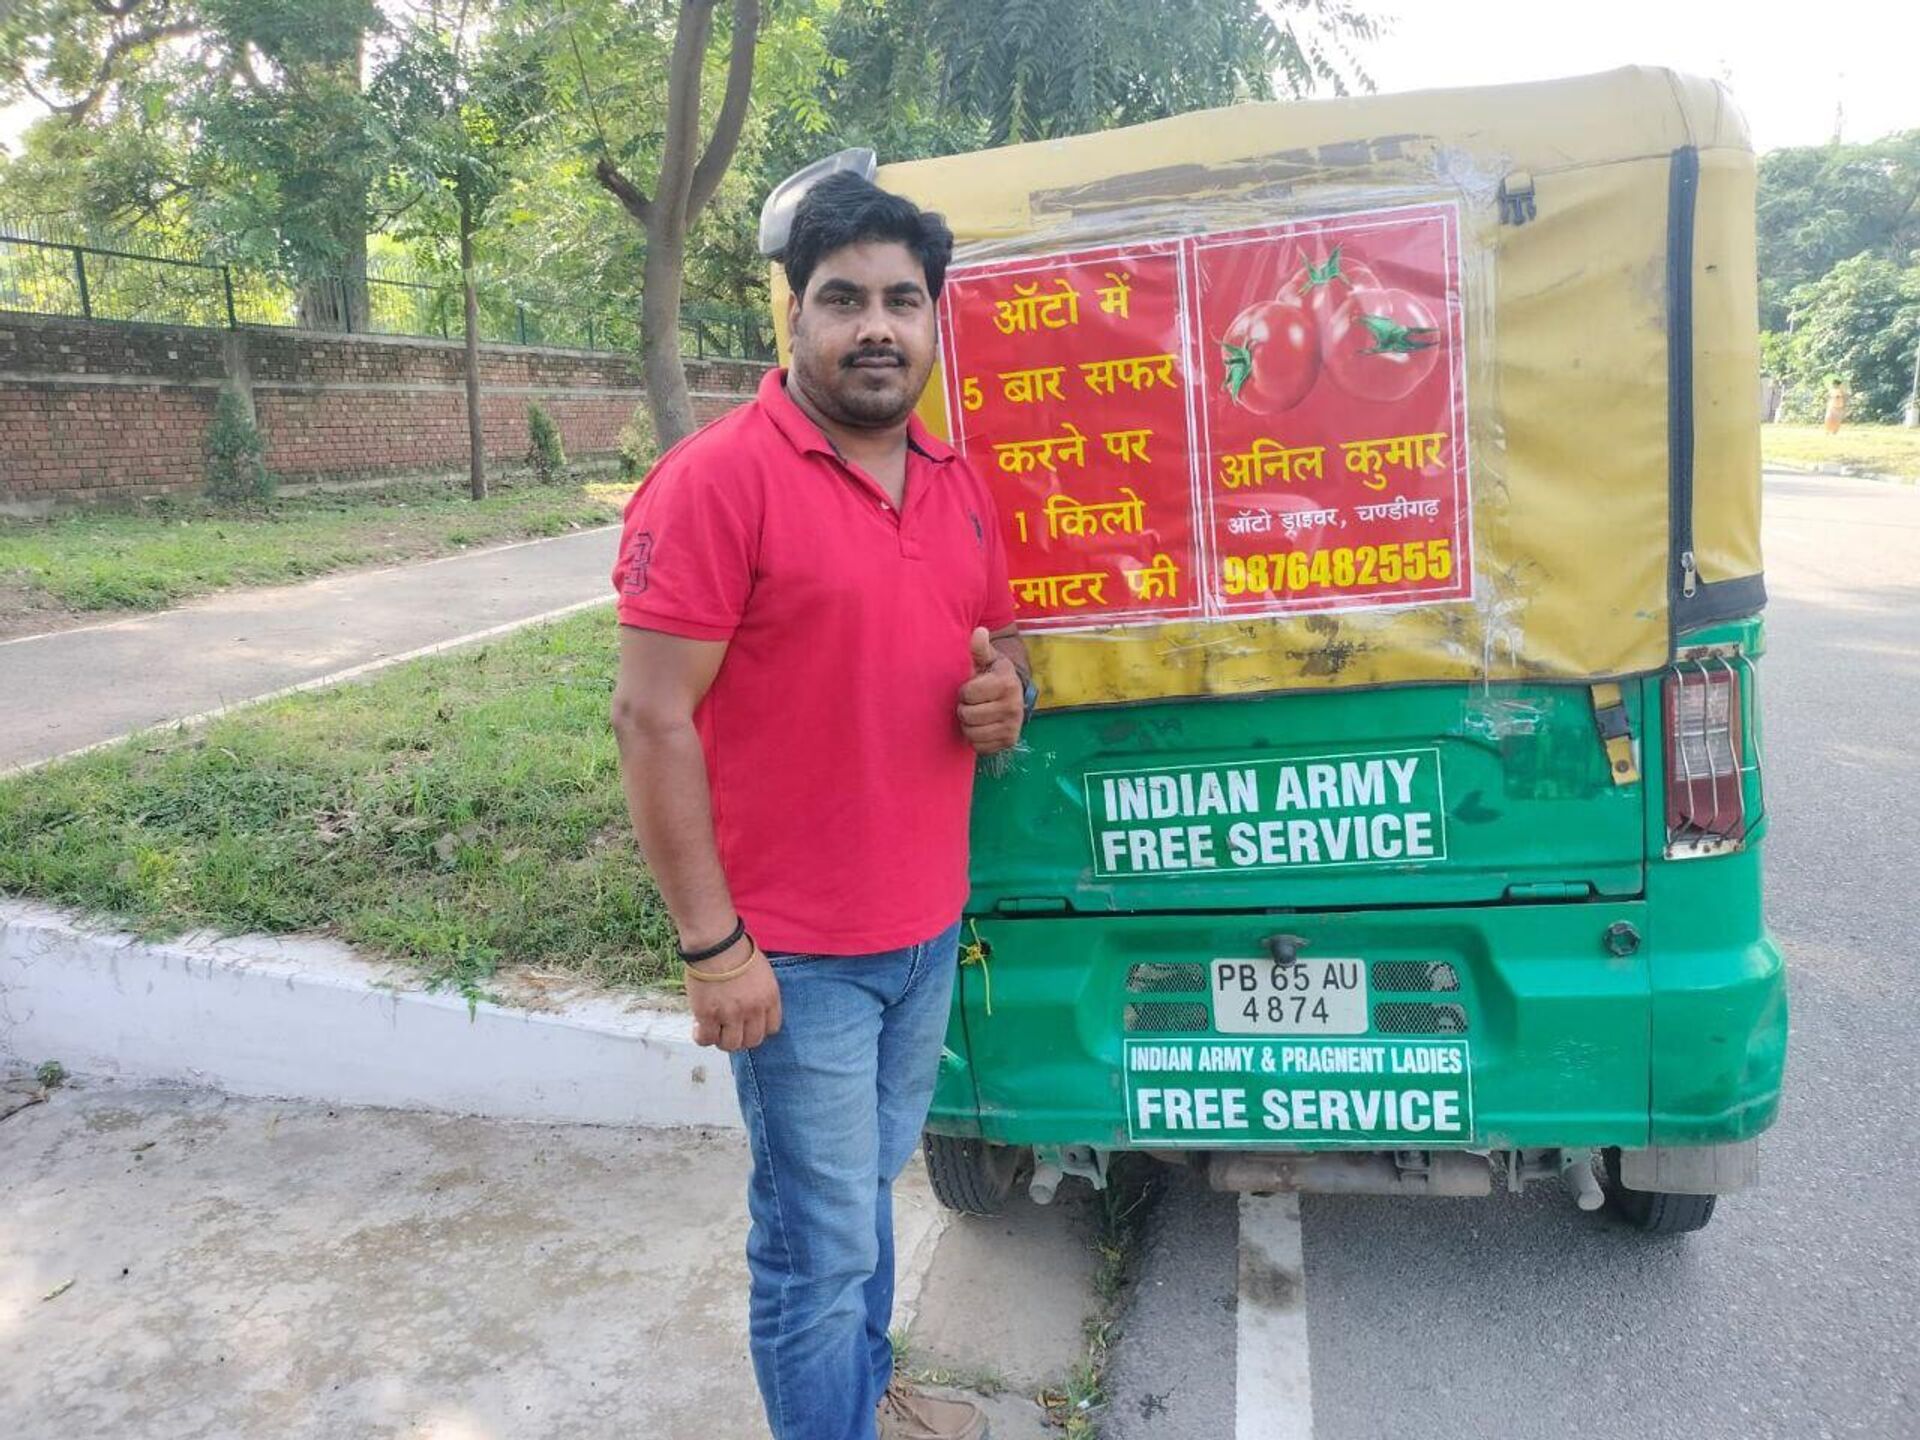 Tomato Crisis: Chandigarh's Auto Rickshaw Driver Attracts Passengers with ‘A Deal’ - Sputnik India, 1920, 19.07.2023